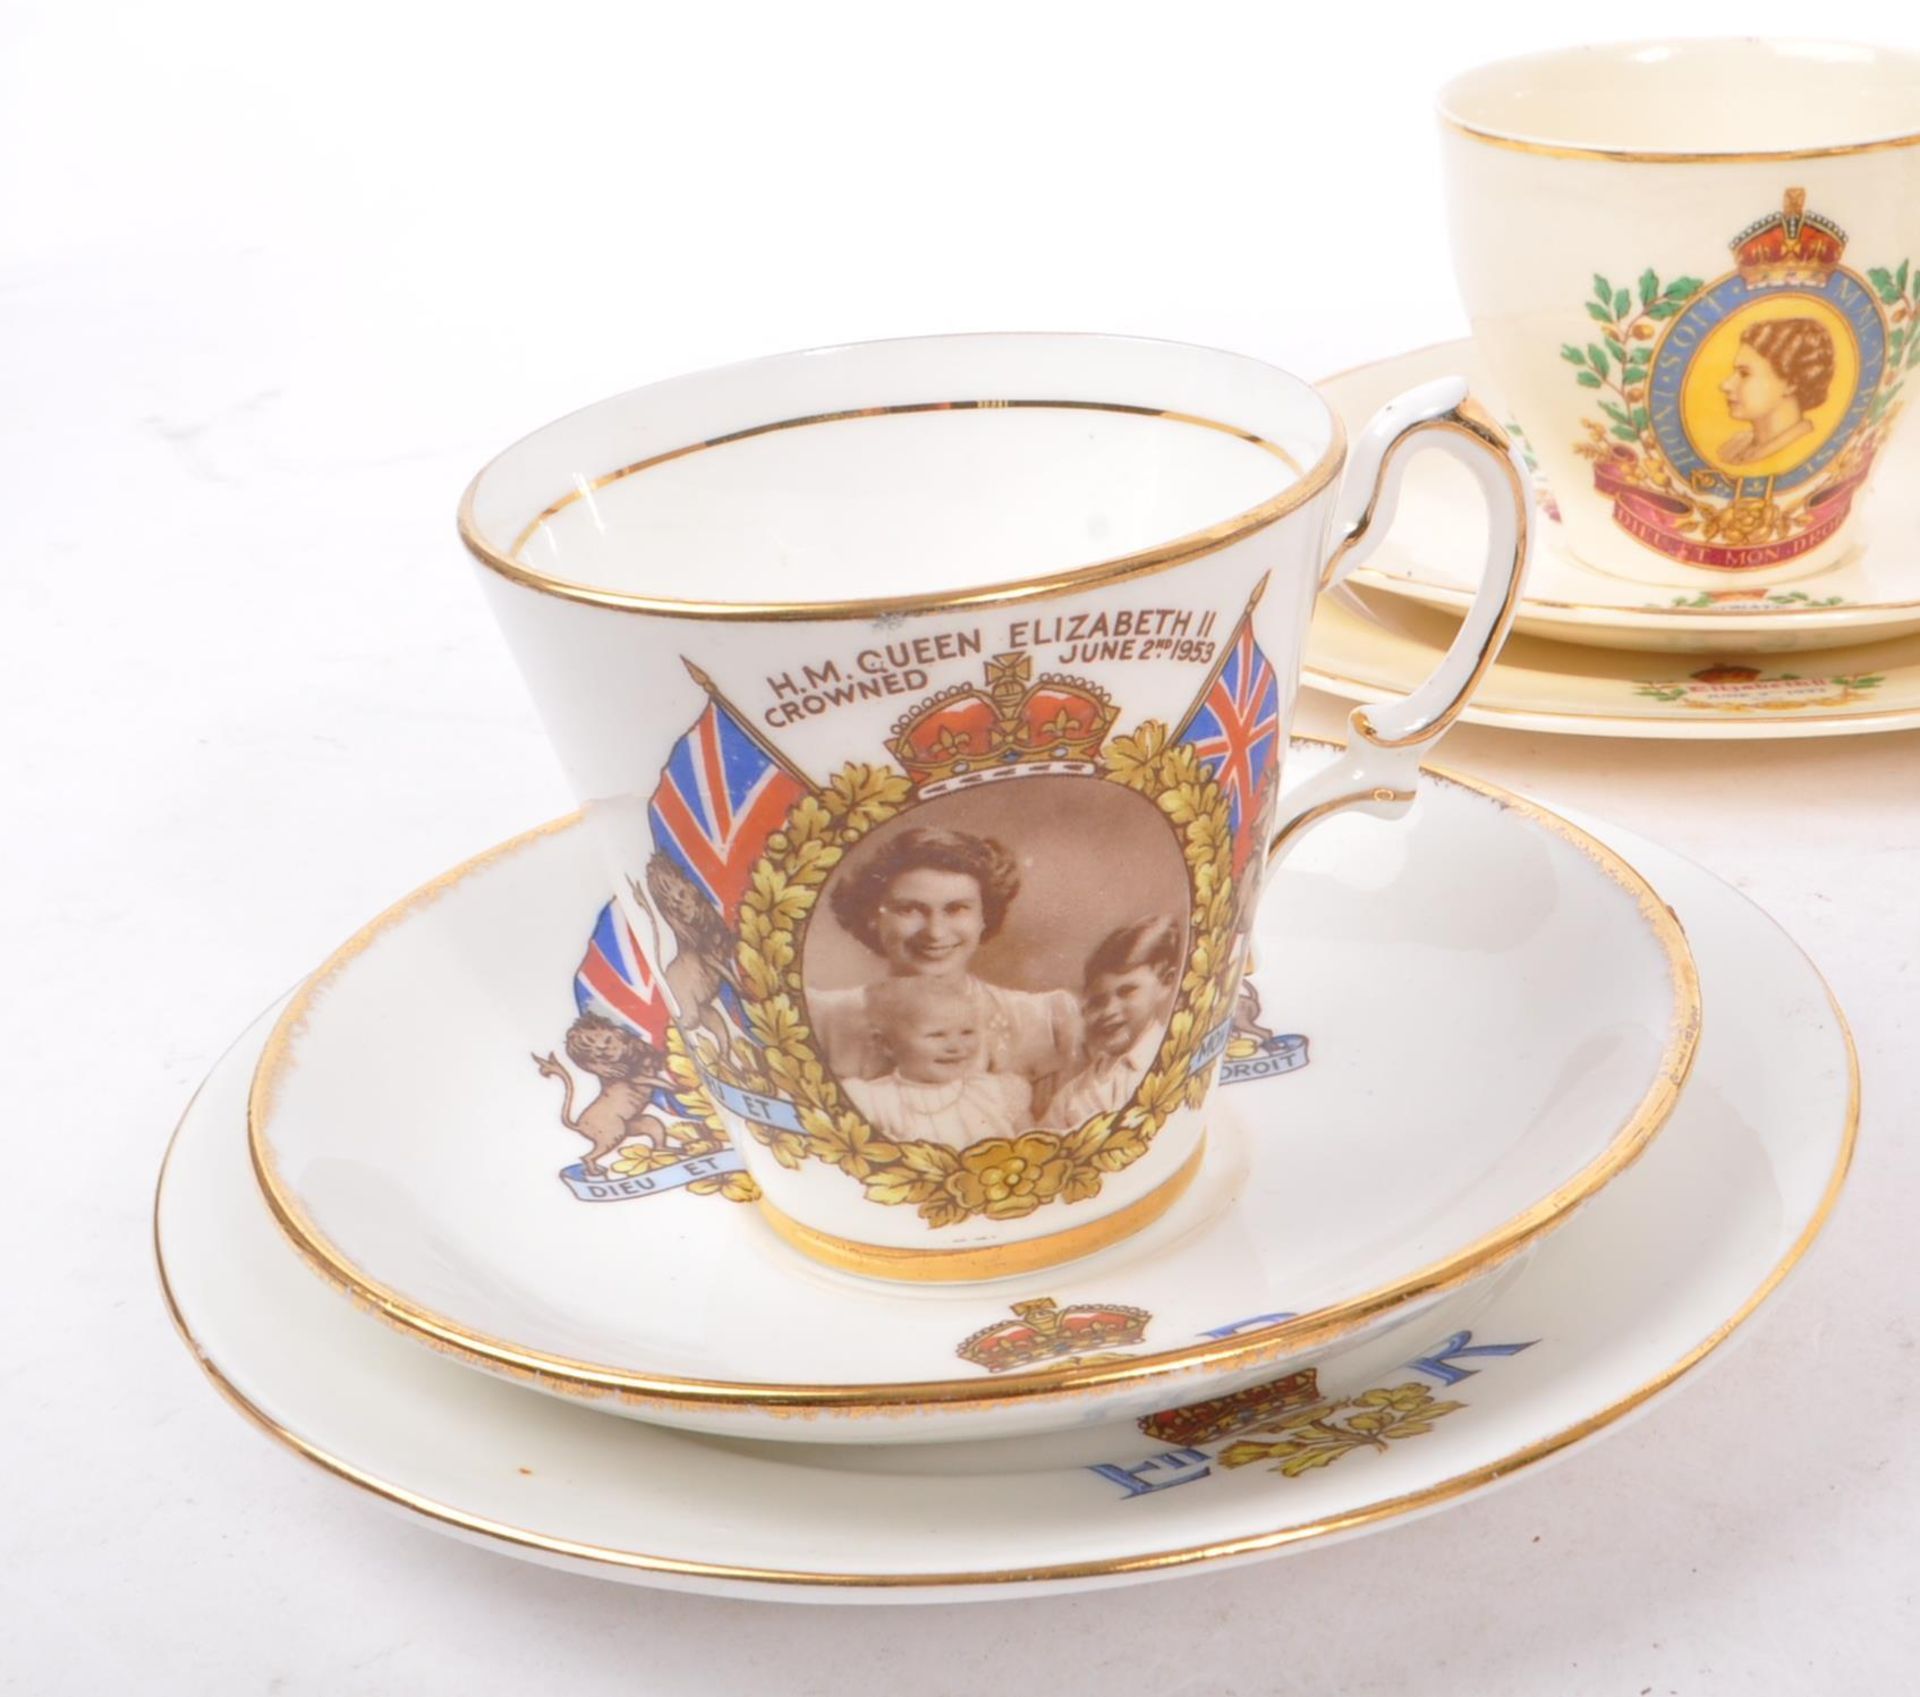 COLLECTION OF QUEEN ELIZABETH II CORONATION CHINA ITEMS - Image 2 of 6